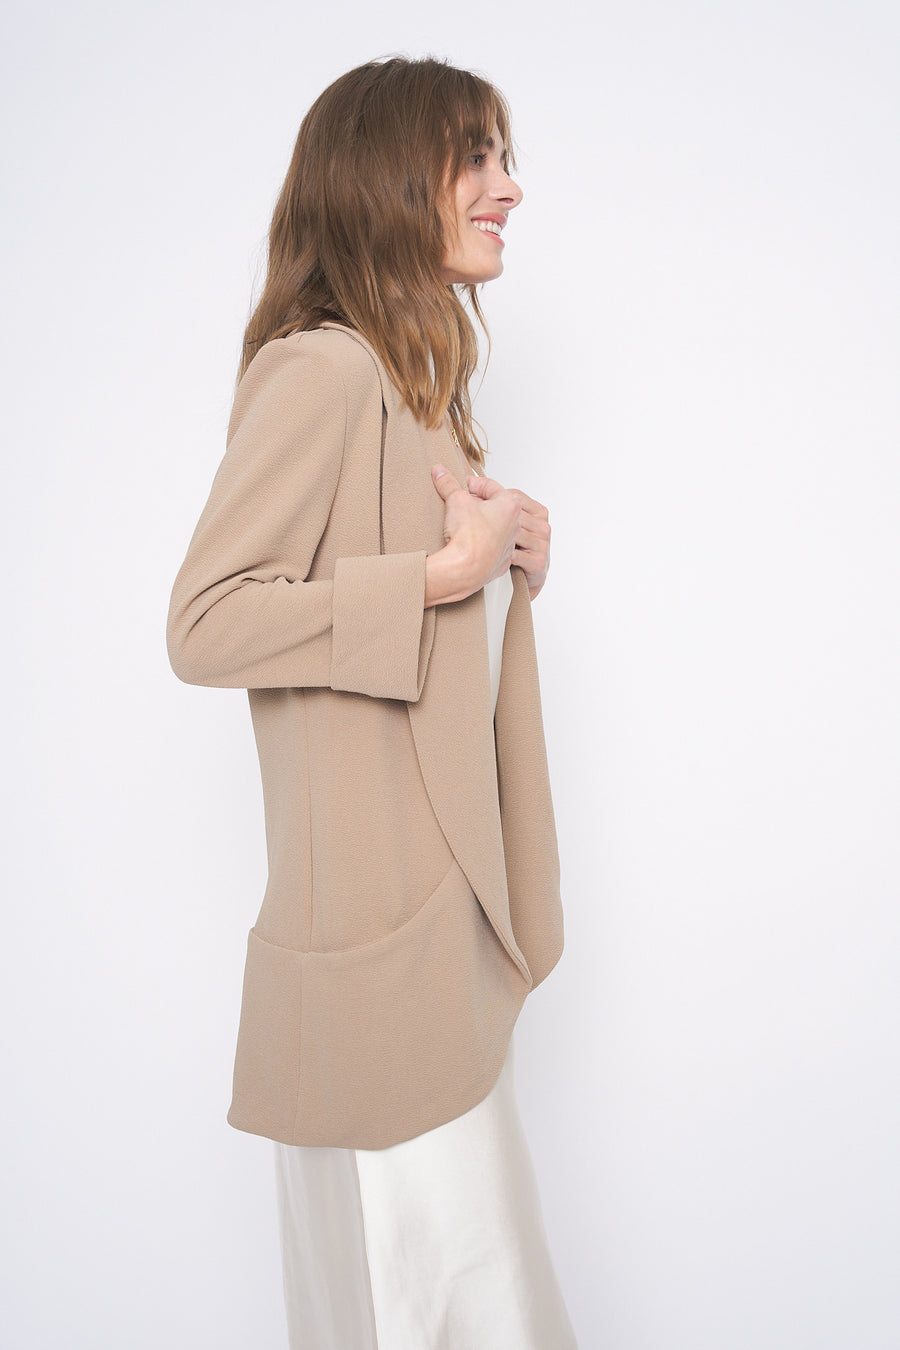 No Srcipt image - Images of 4 of 5 Classic Melanie Shawl Taupe Color Staple Workwear Blazer